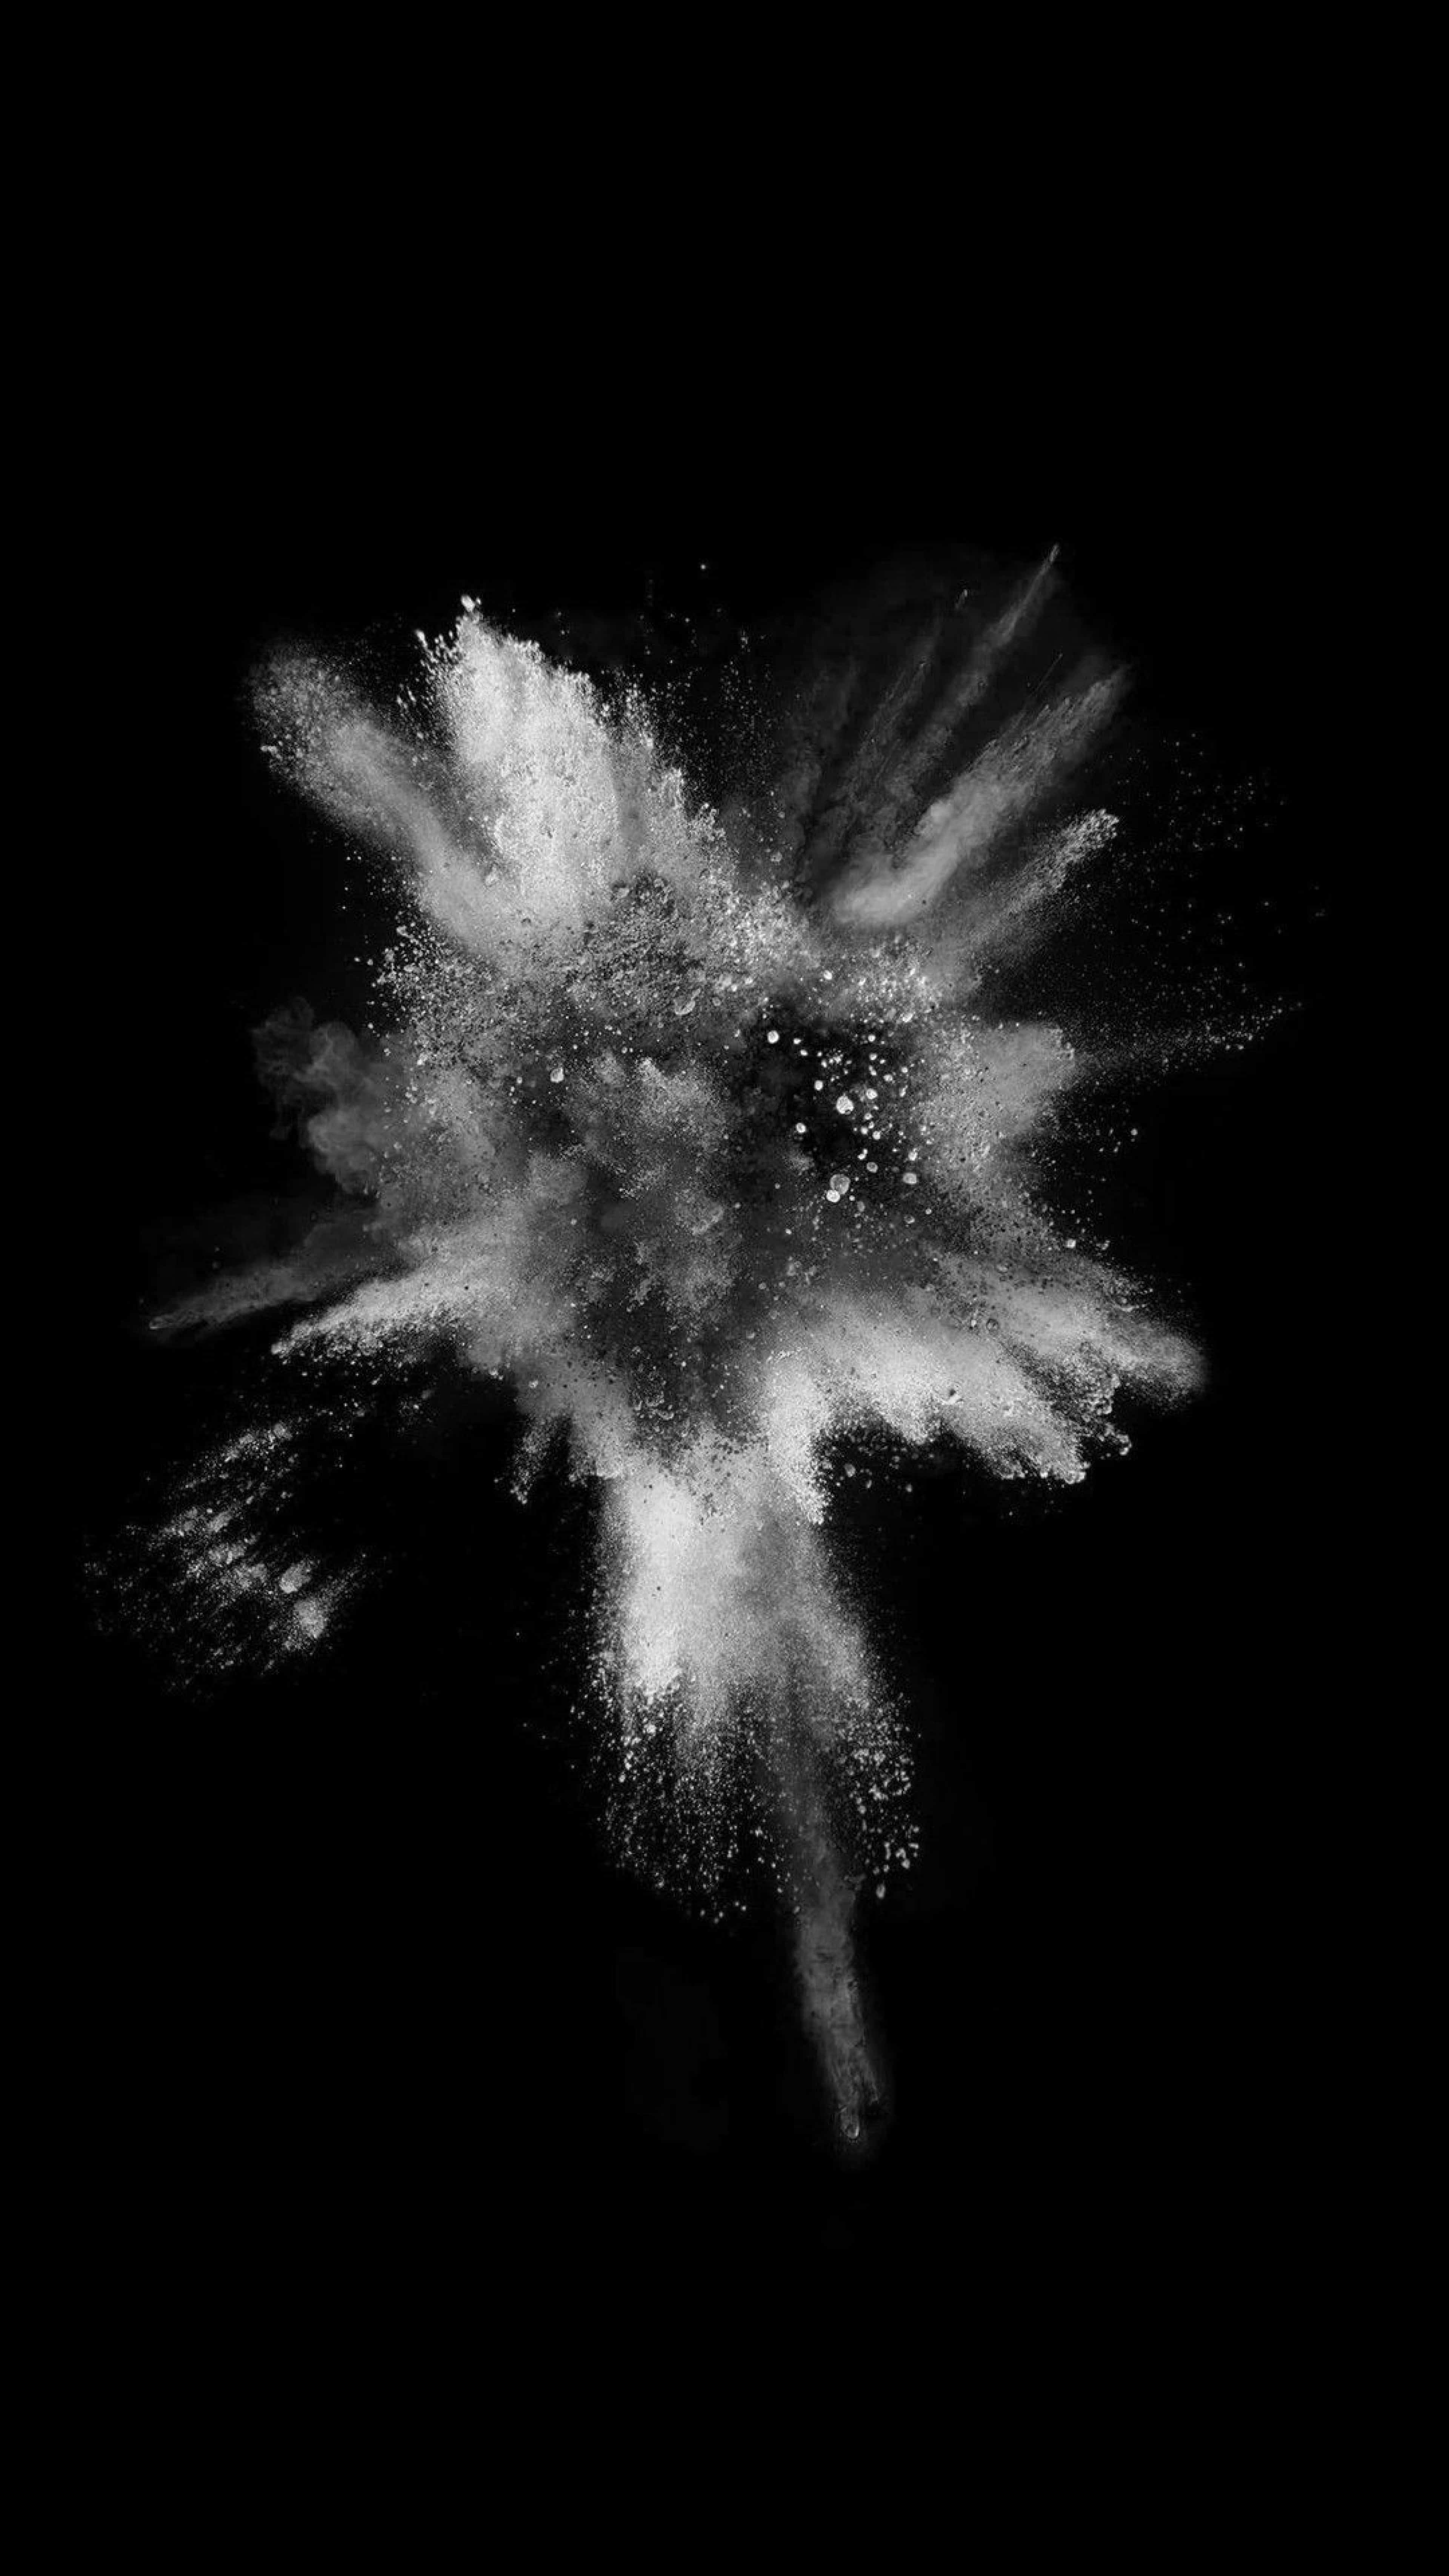 A white dust explosion against a black background - Black and white